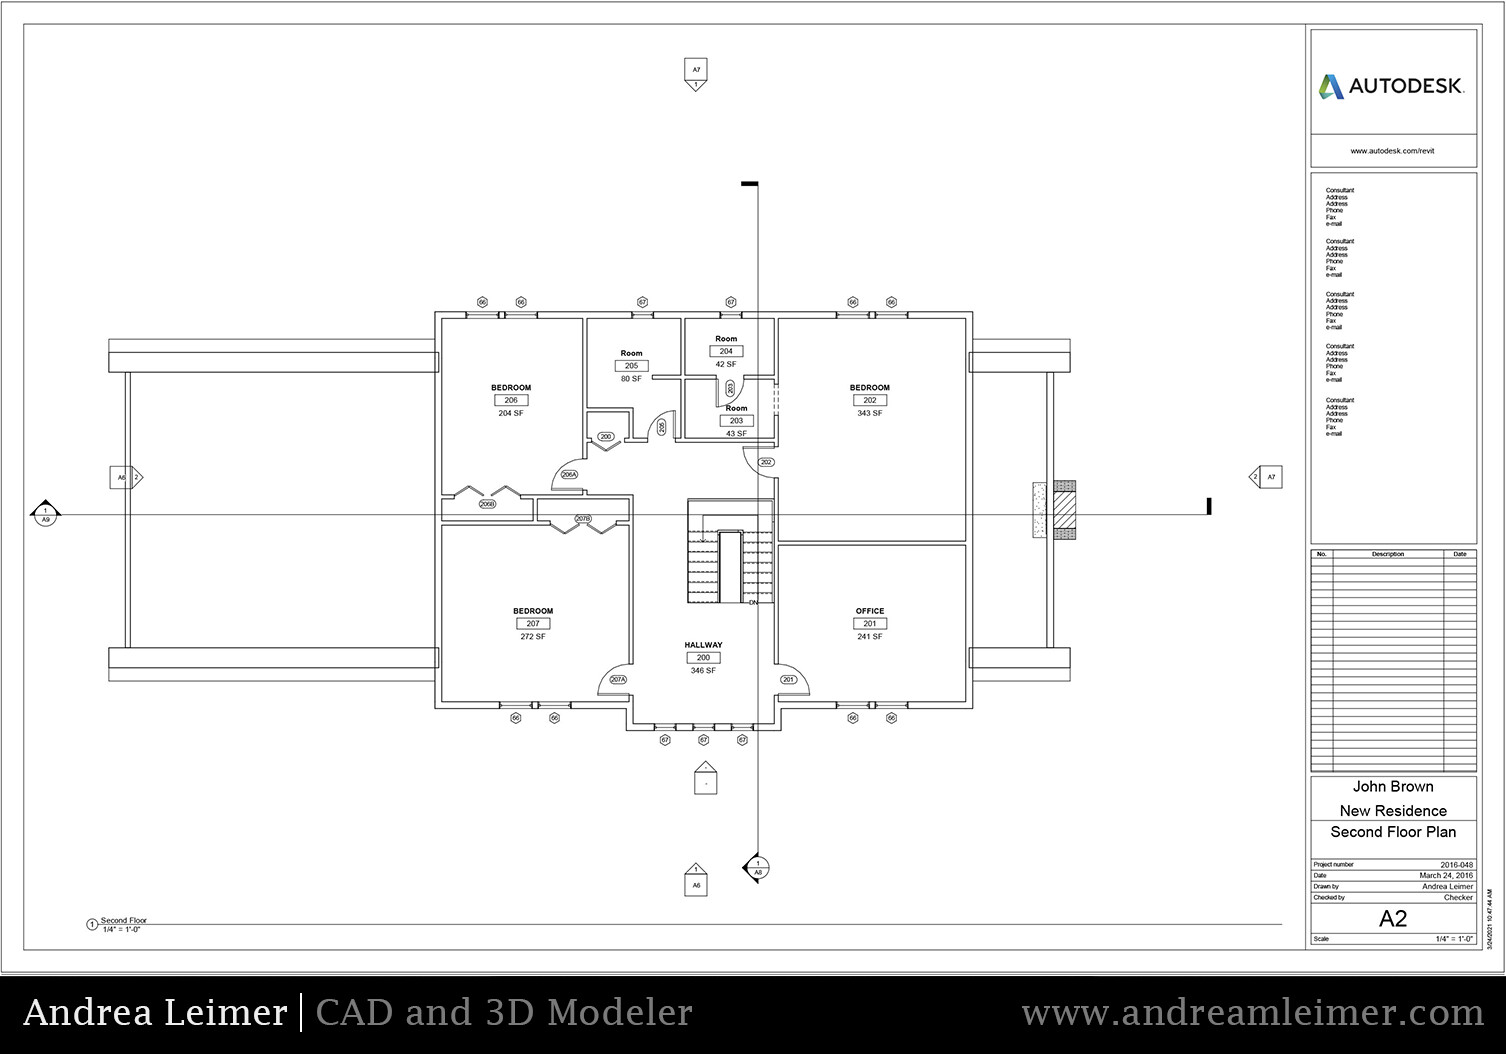 Architectural CAD A2 Second Floor Plan